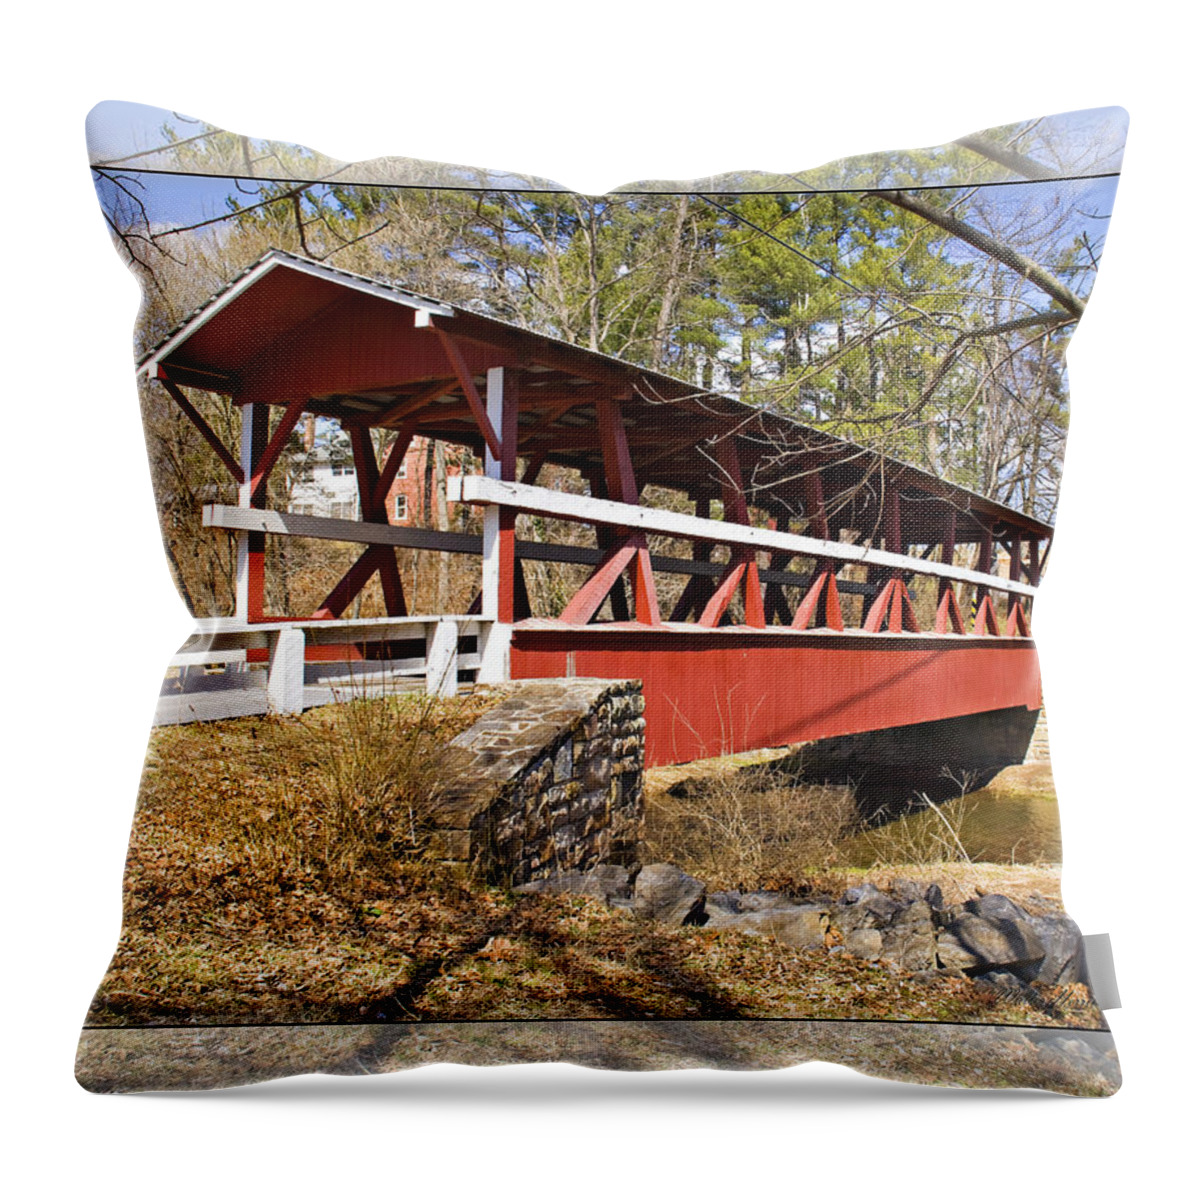 Covered Bridge In Pa. Throw Pillow featuring the photograph Covered Bridge in Pa. #2 by Walter Herrit